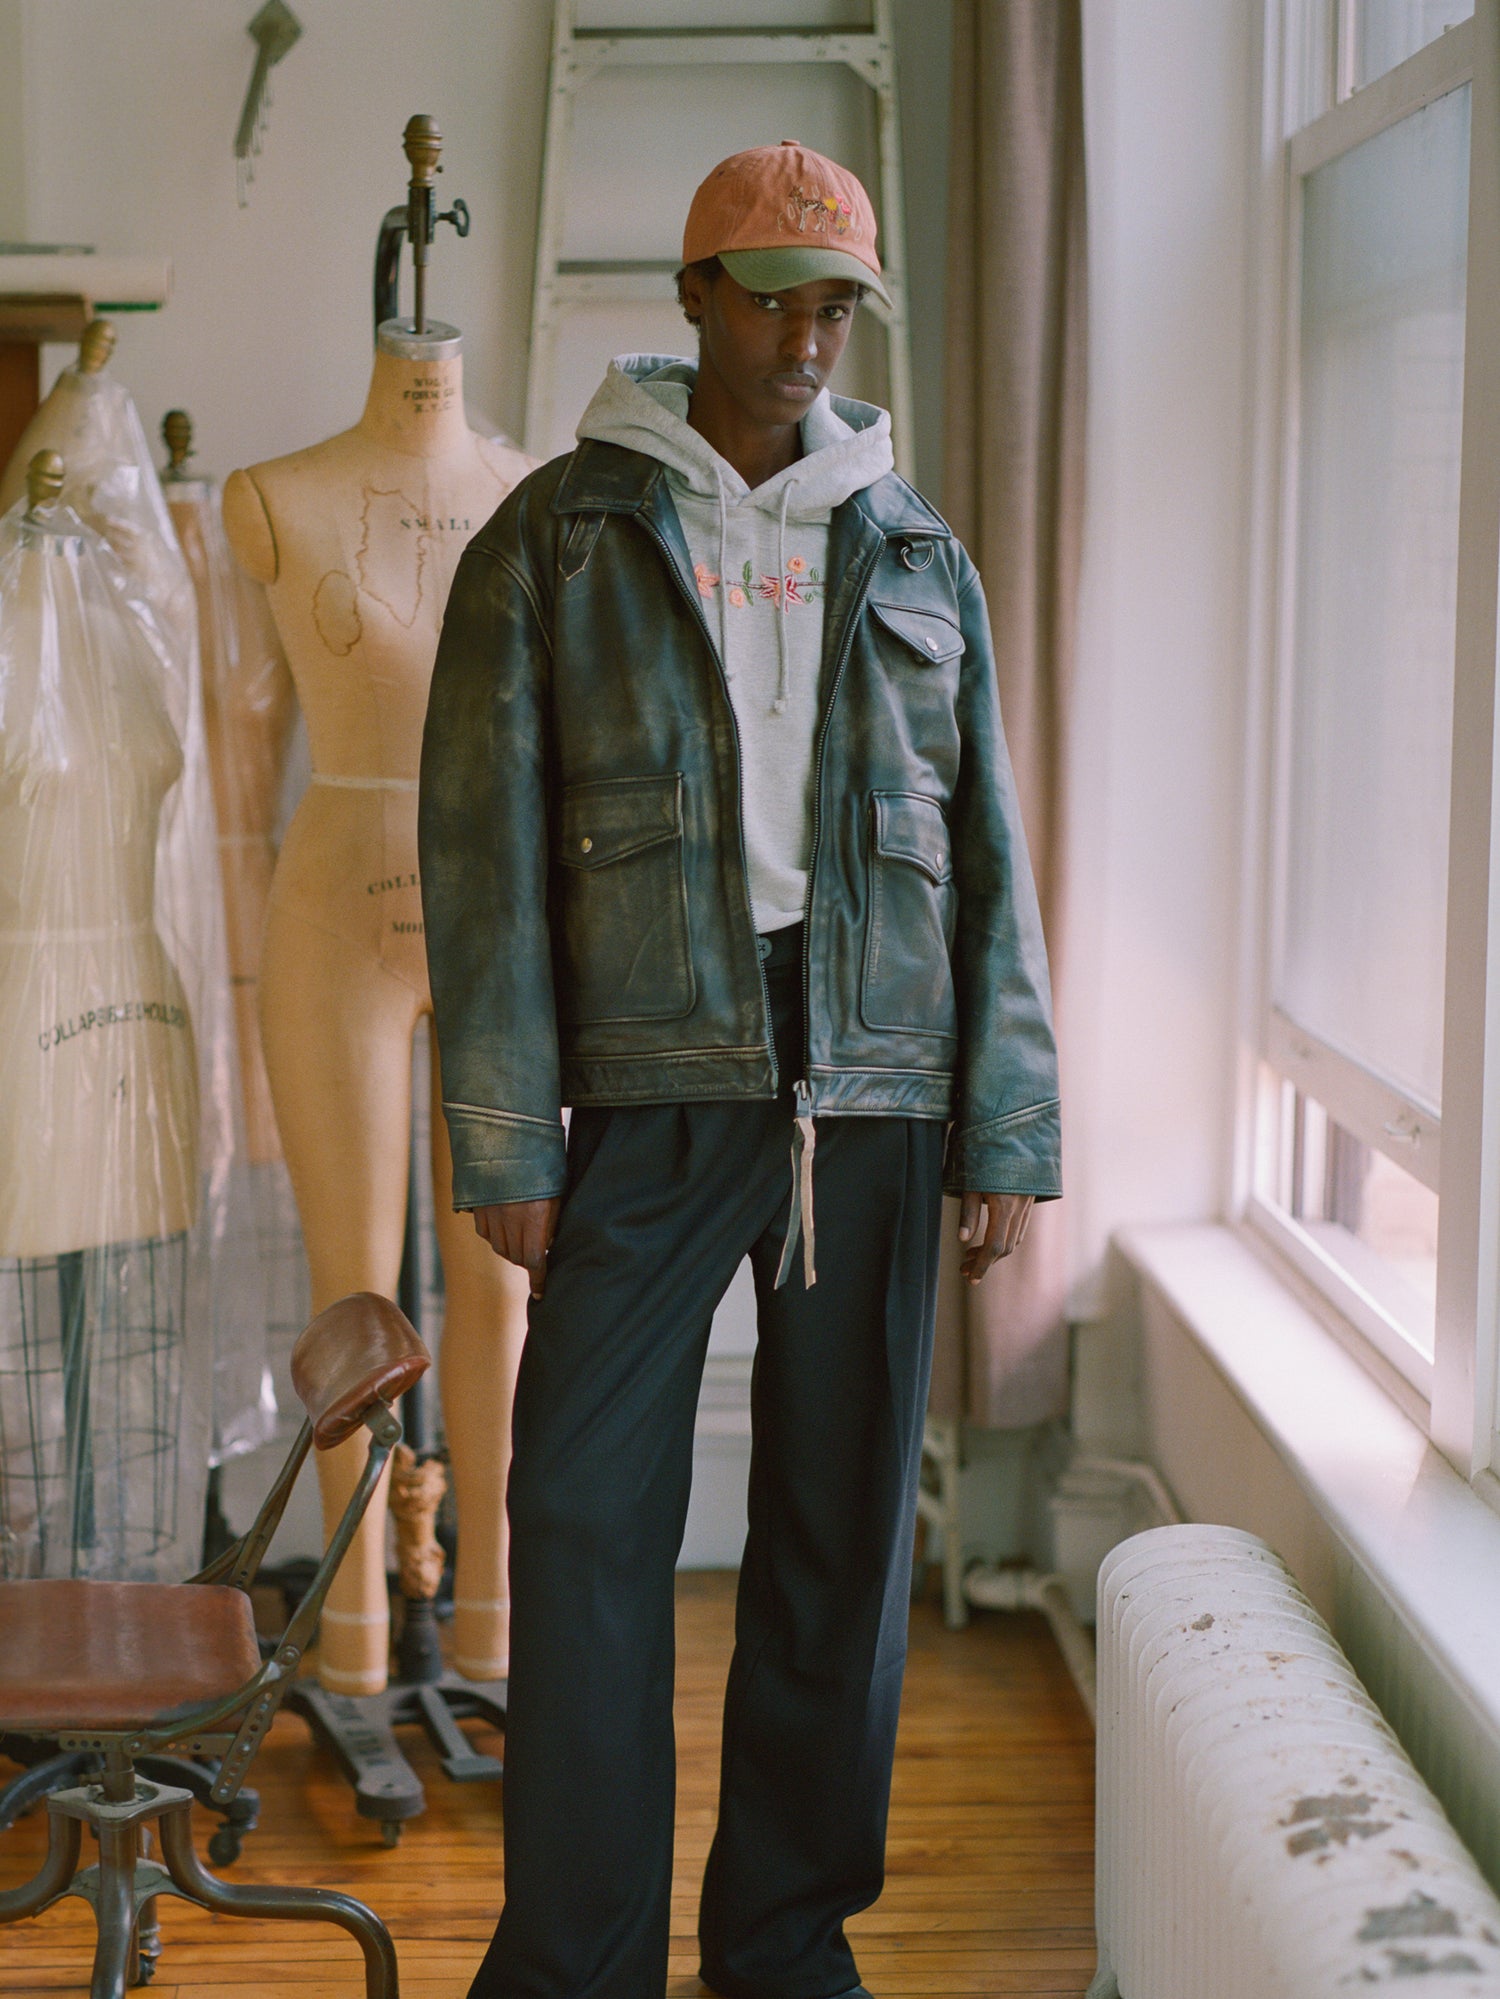 A black man wearing a Found distressed leather pocket jacket stands in front of mannequins in a room.